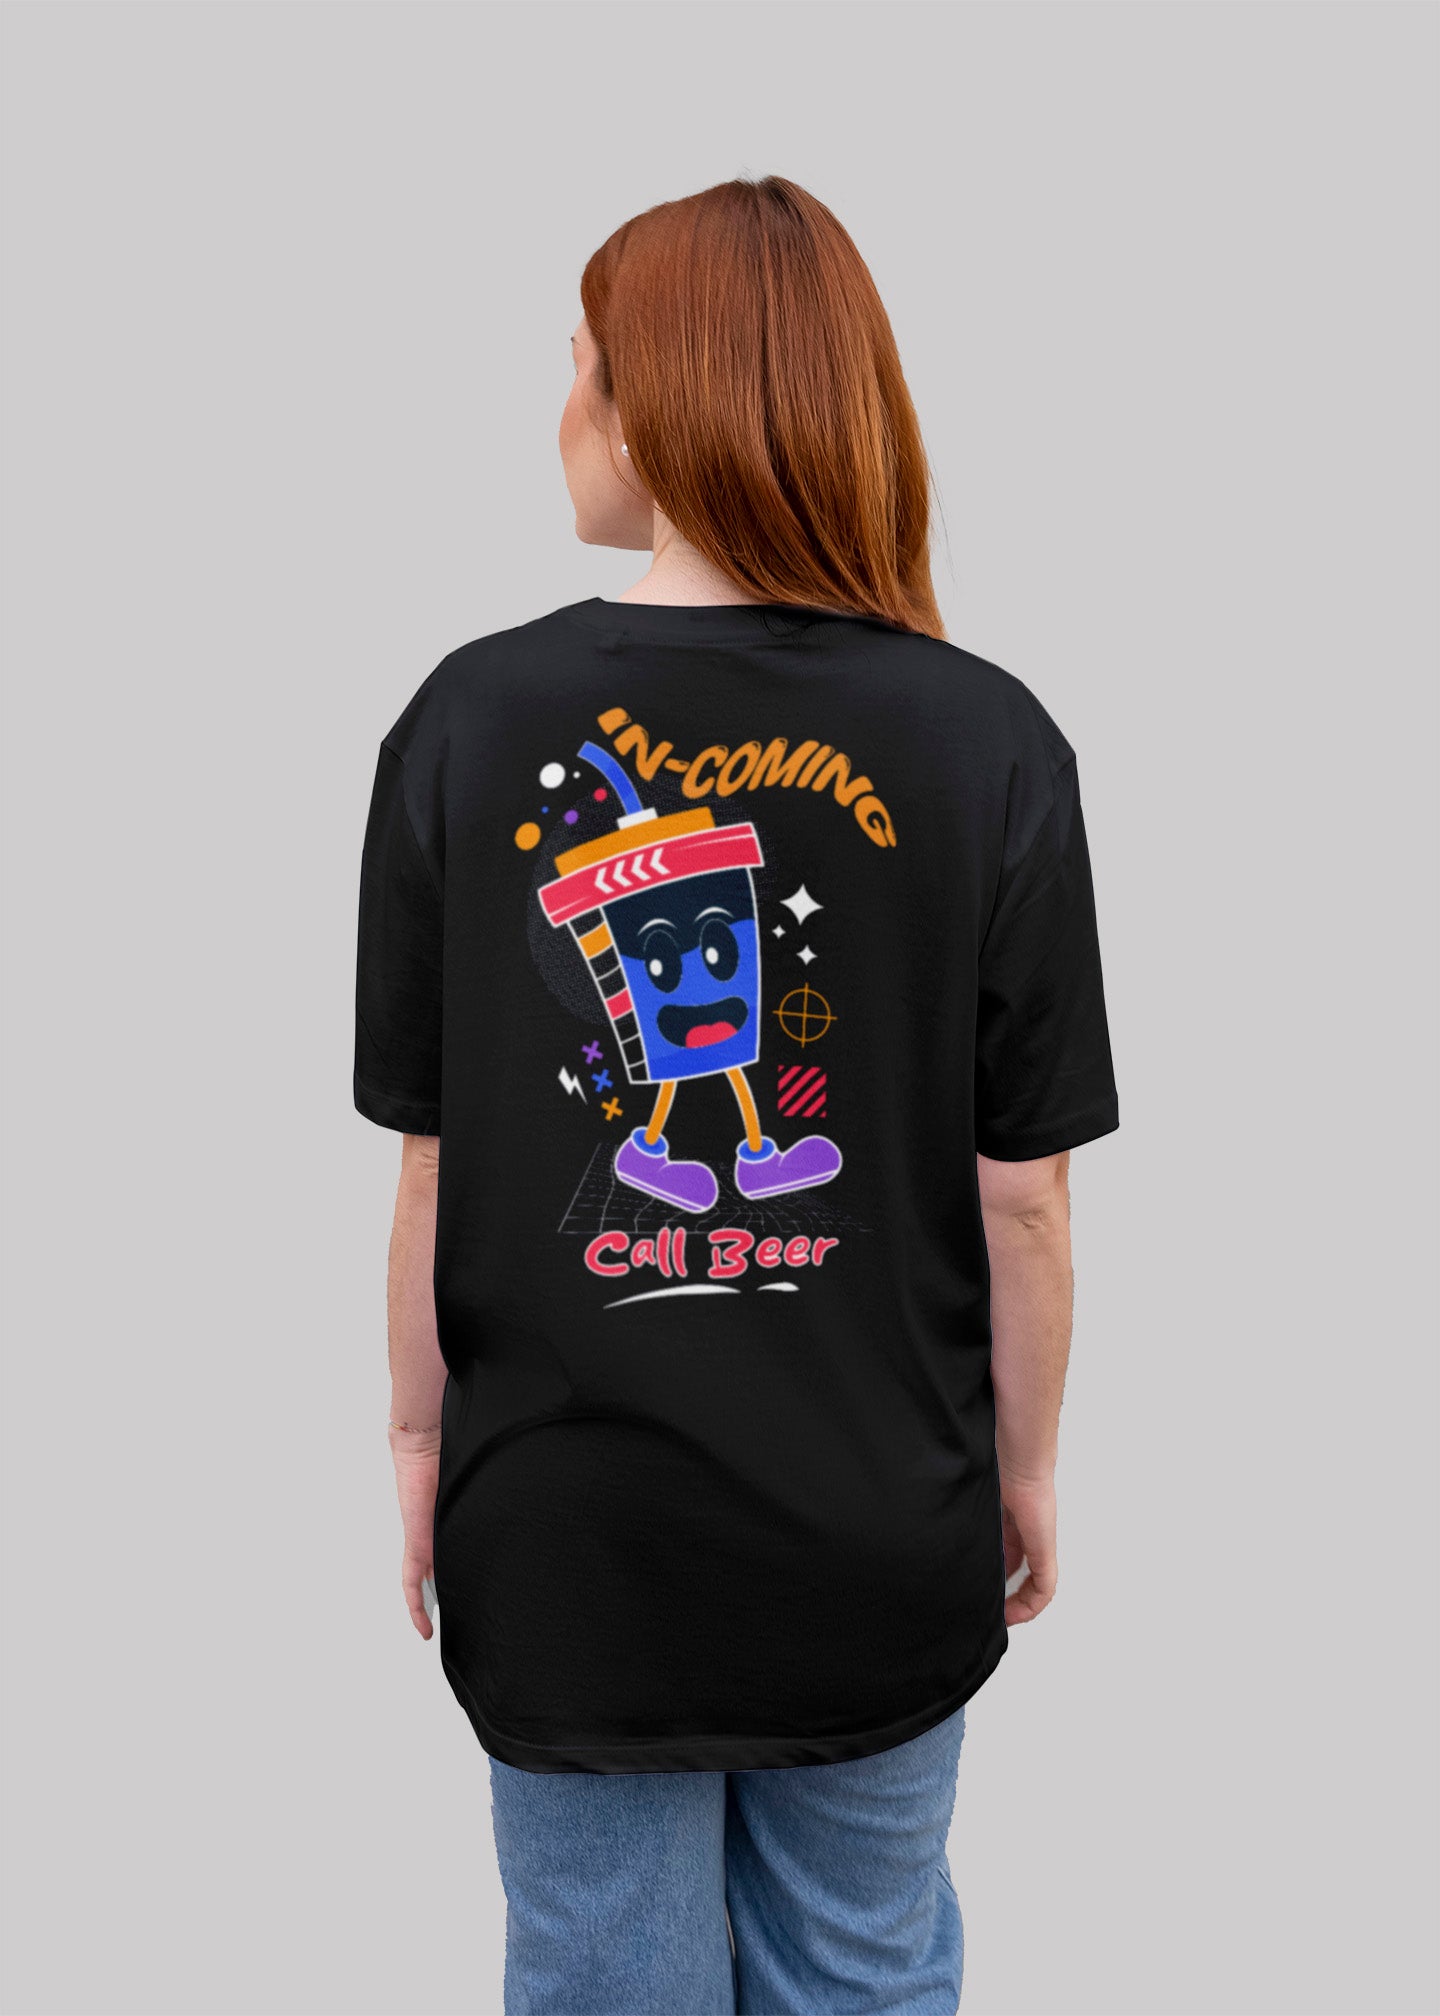 Incoming call Beer Graphic Printed Oversized T-shirt